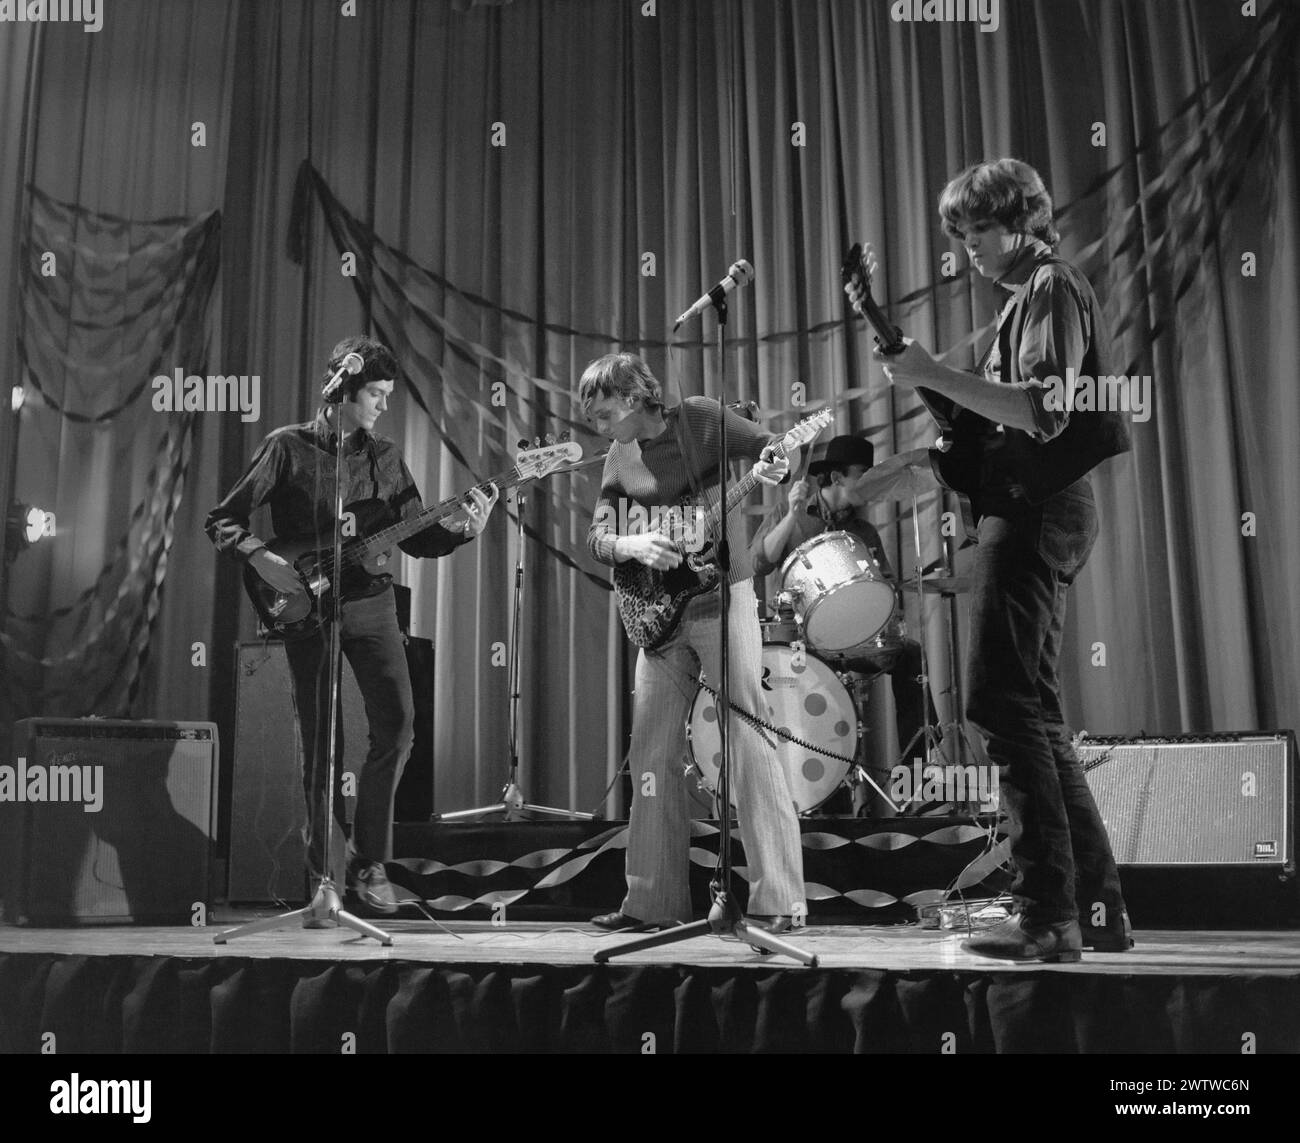 Four piece, all male rock 'n' roll band performing on stage in the 60's Stock Photo